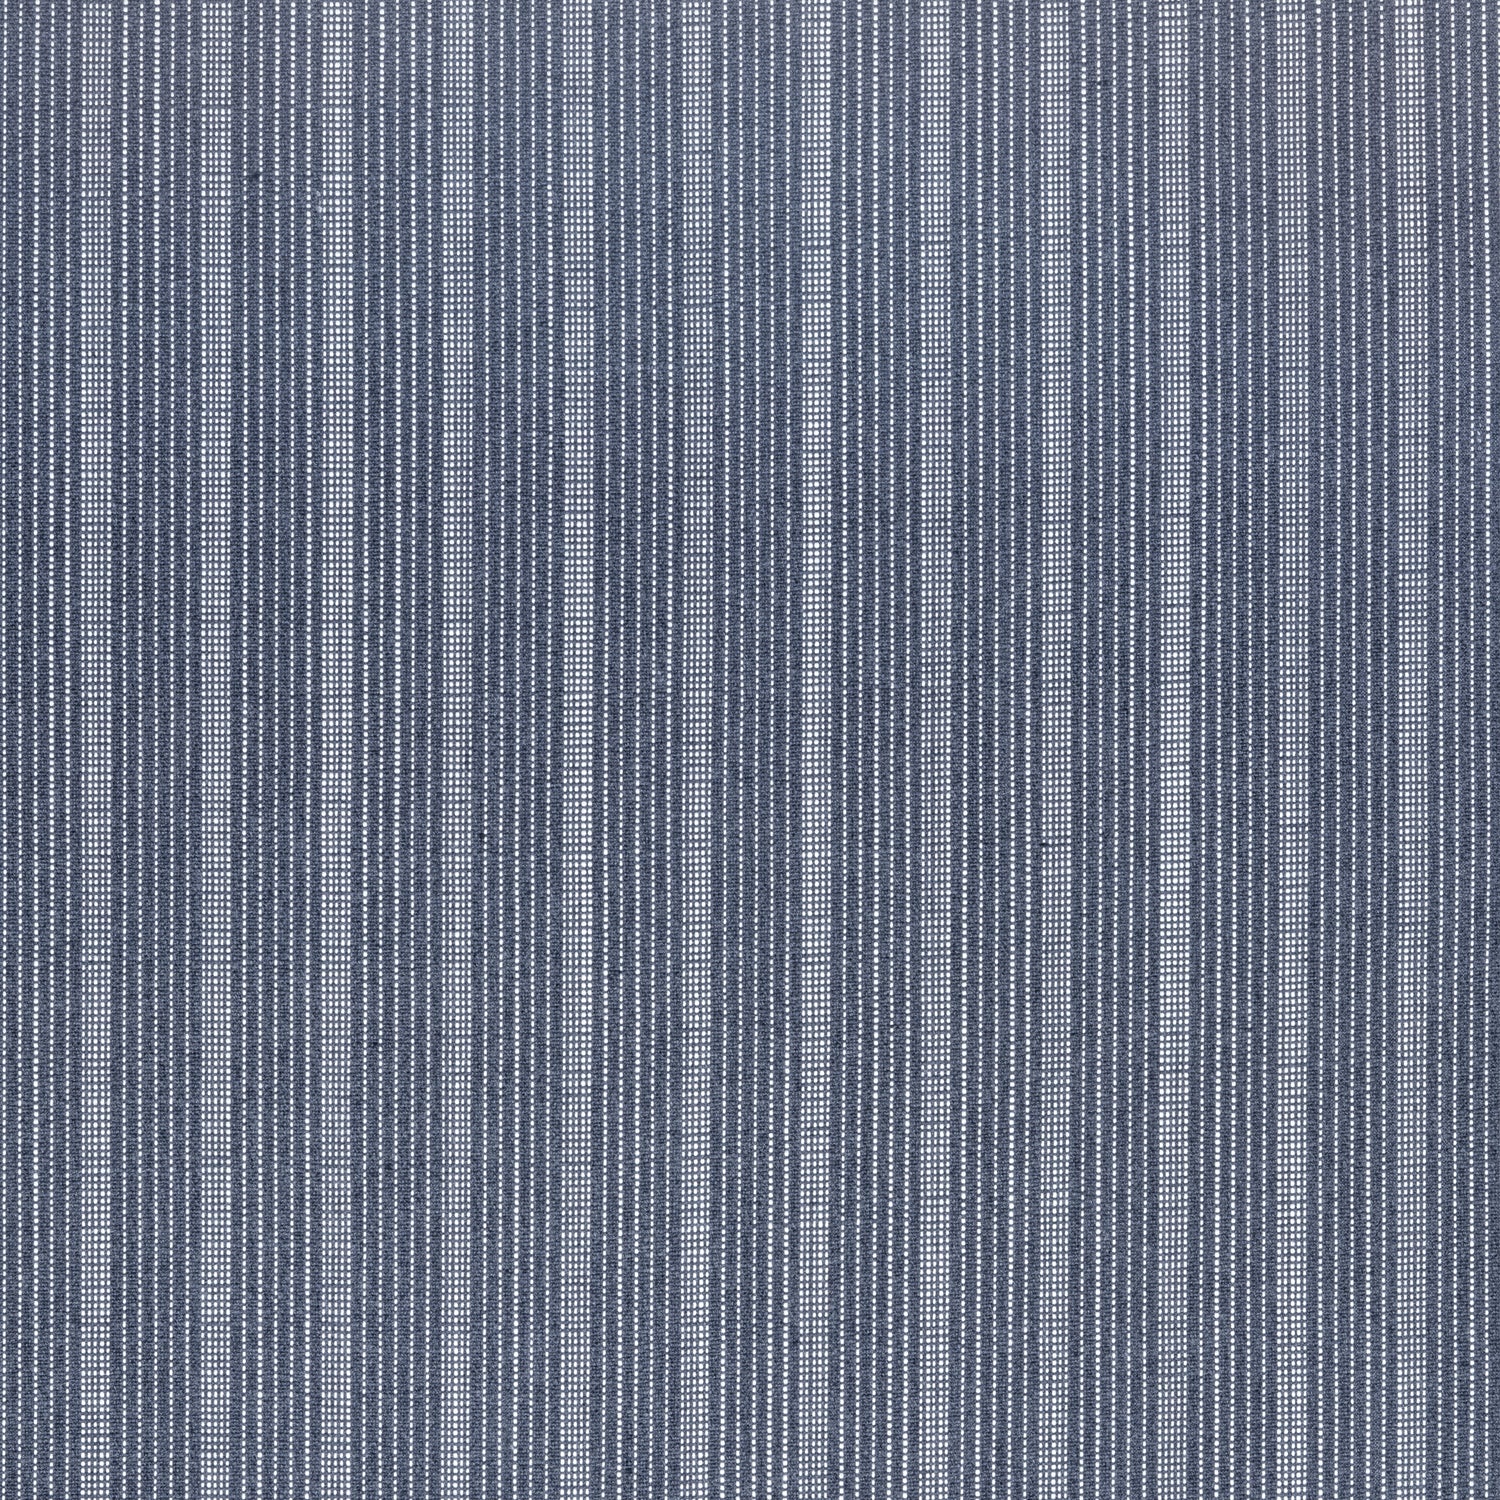 Ebro Stripe fabric in marine color - pattern number W8510 - by Thibaut in the Villa collection